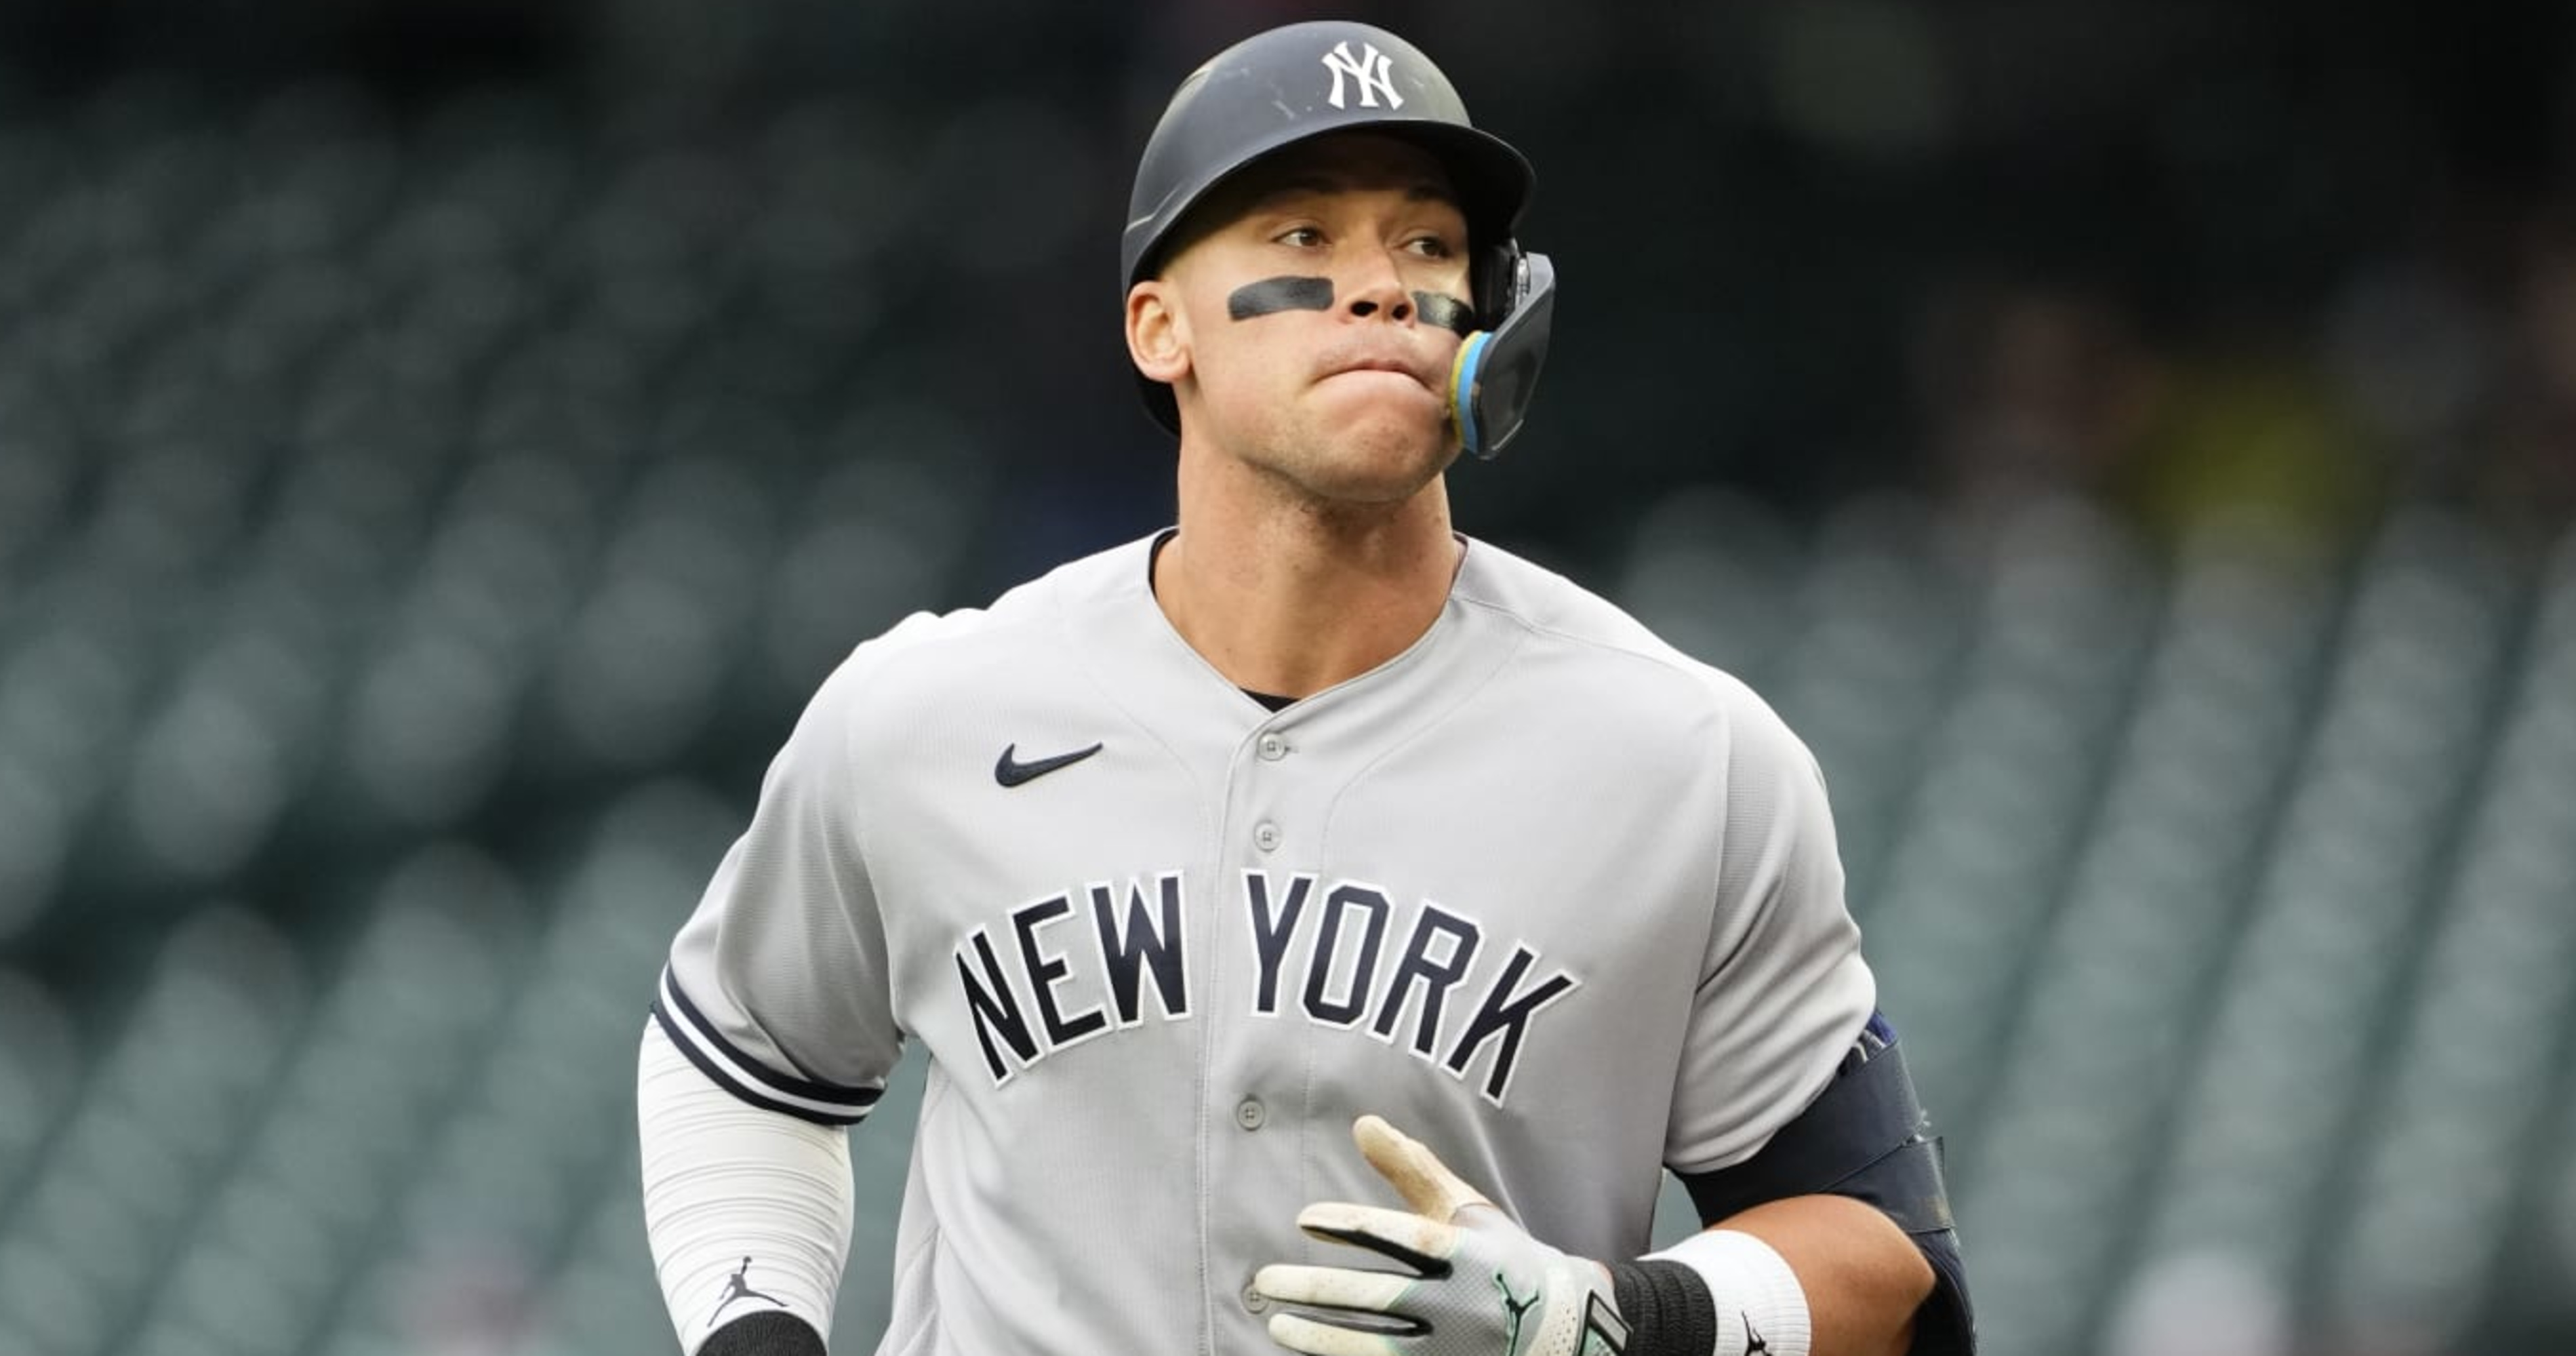 Yankees: Aaron Judge has torn toe ligament, no timetable to return